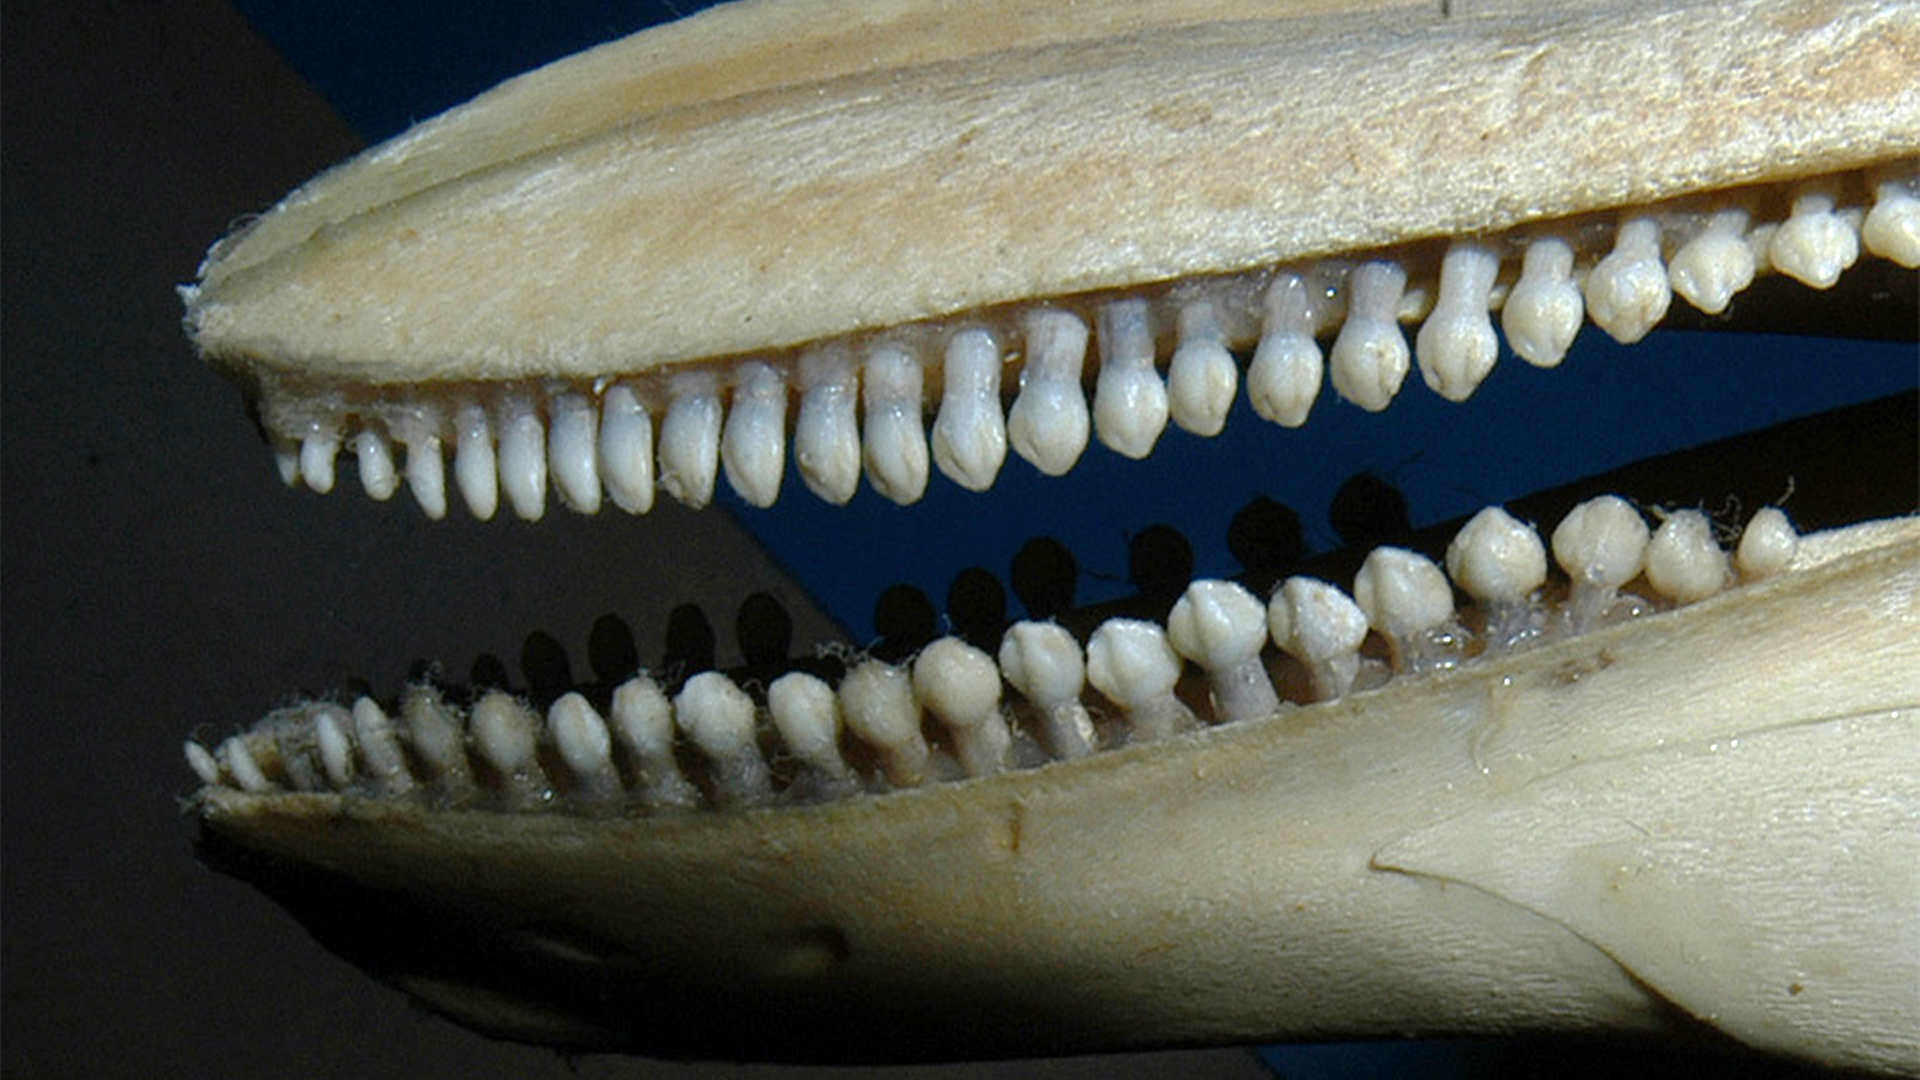 Close-up view of a set of porpoise teeth. The teeth are spade-shaped.